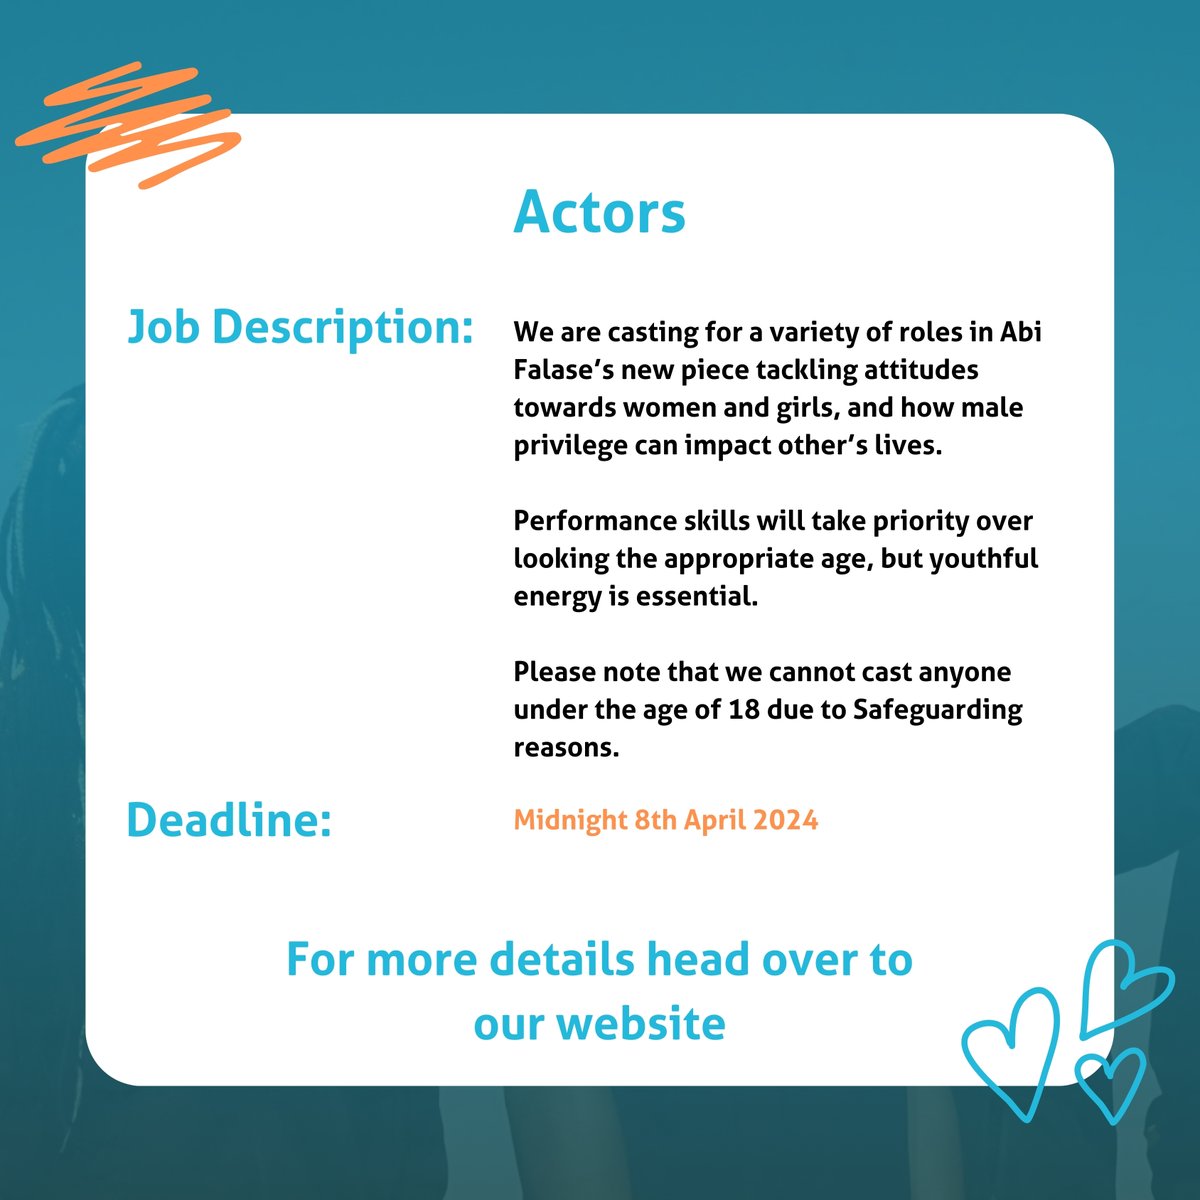 We are casting for a variety of roles in Abi Falase’s new piece tackling attitudes towards #women and #girls, and how male #privilege can impact other’s lives. Follow the link to find out more ow.ly/n5fq50R4jEX #job #immediatetheatre #acting #play #jobopportunity